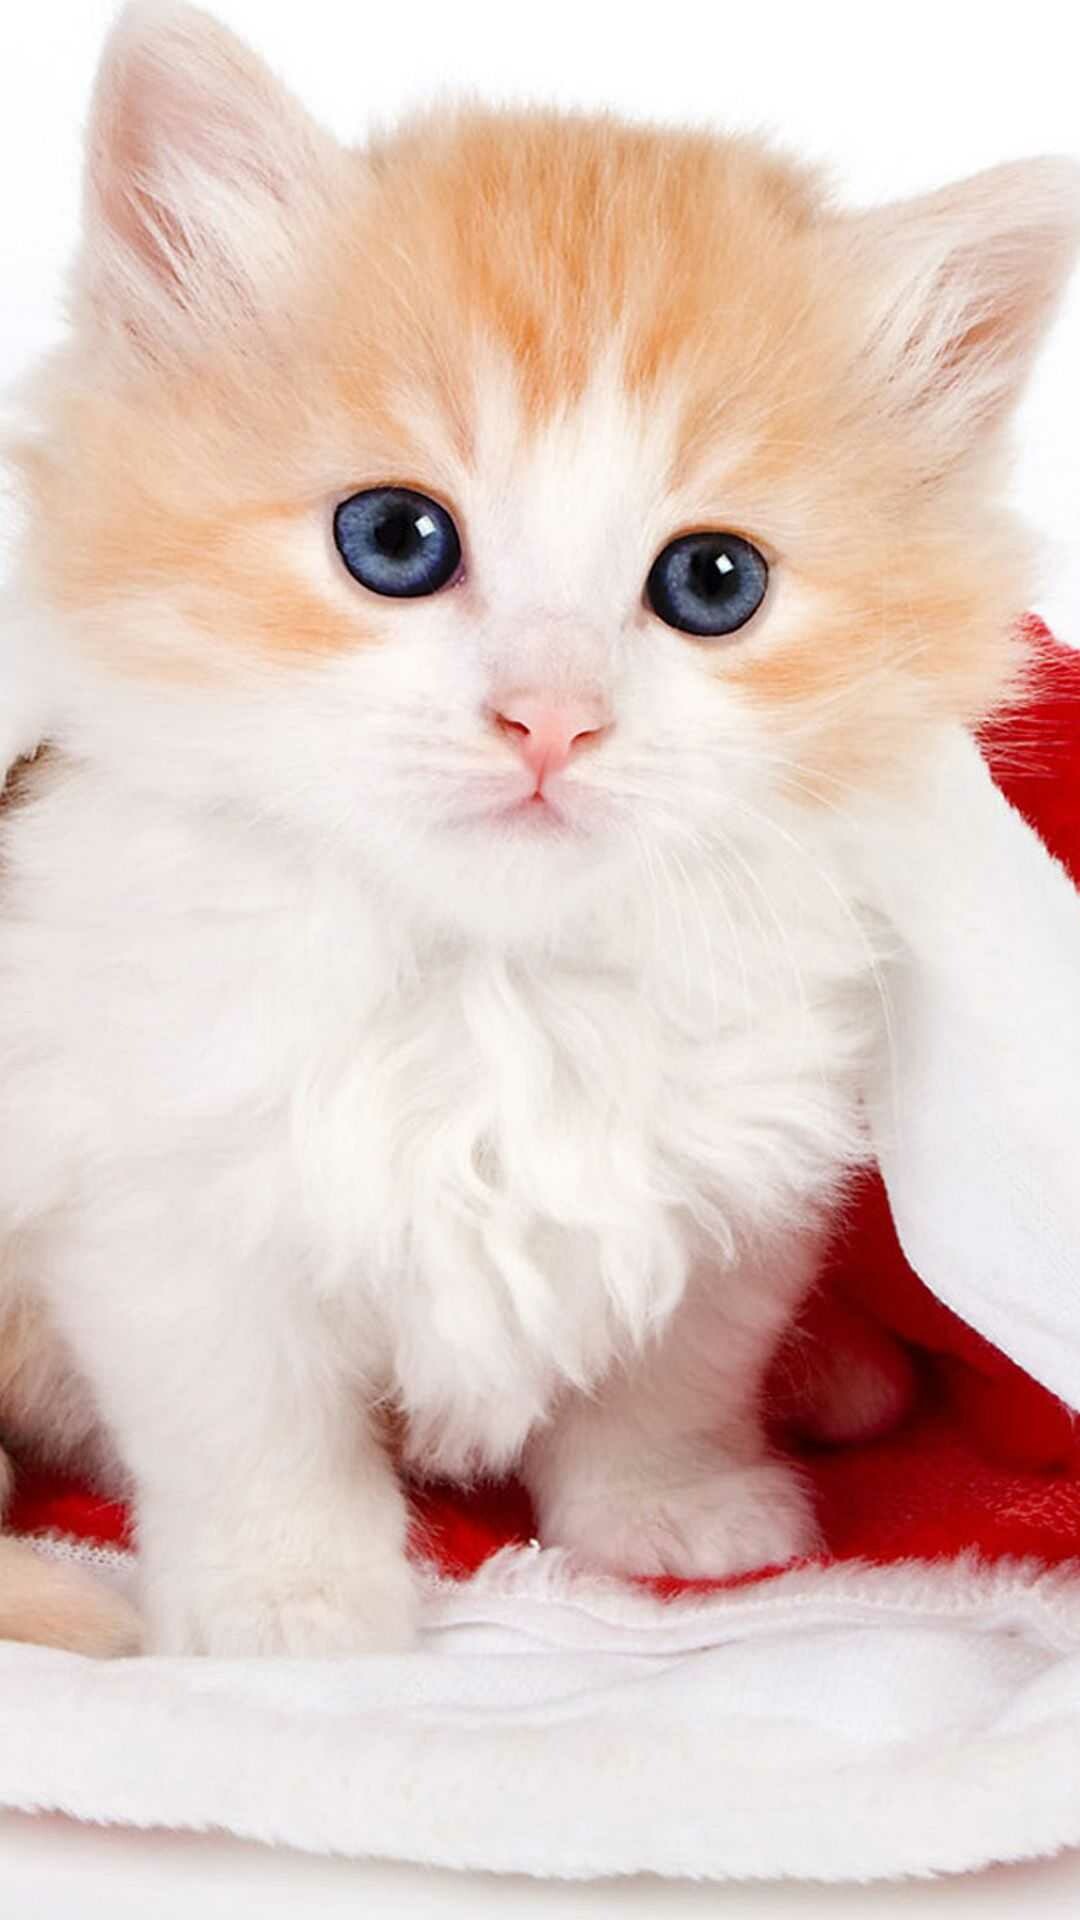 Kitten: Cats, Commonly kept as house pets. 1080x1920 Full HD Wallpaper.